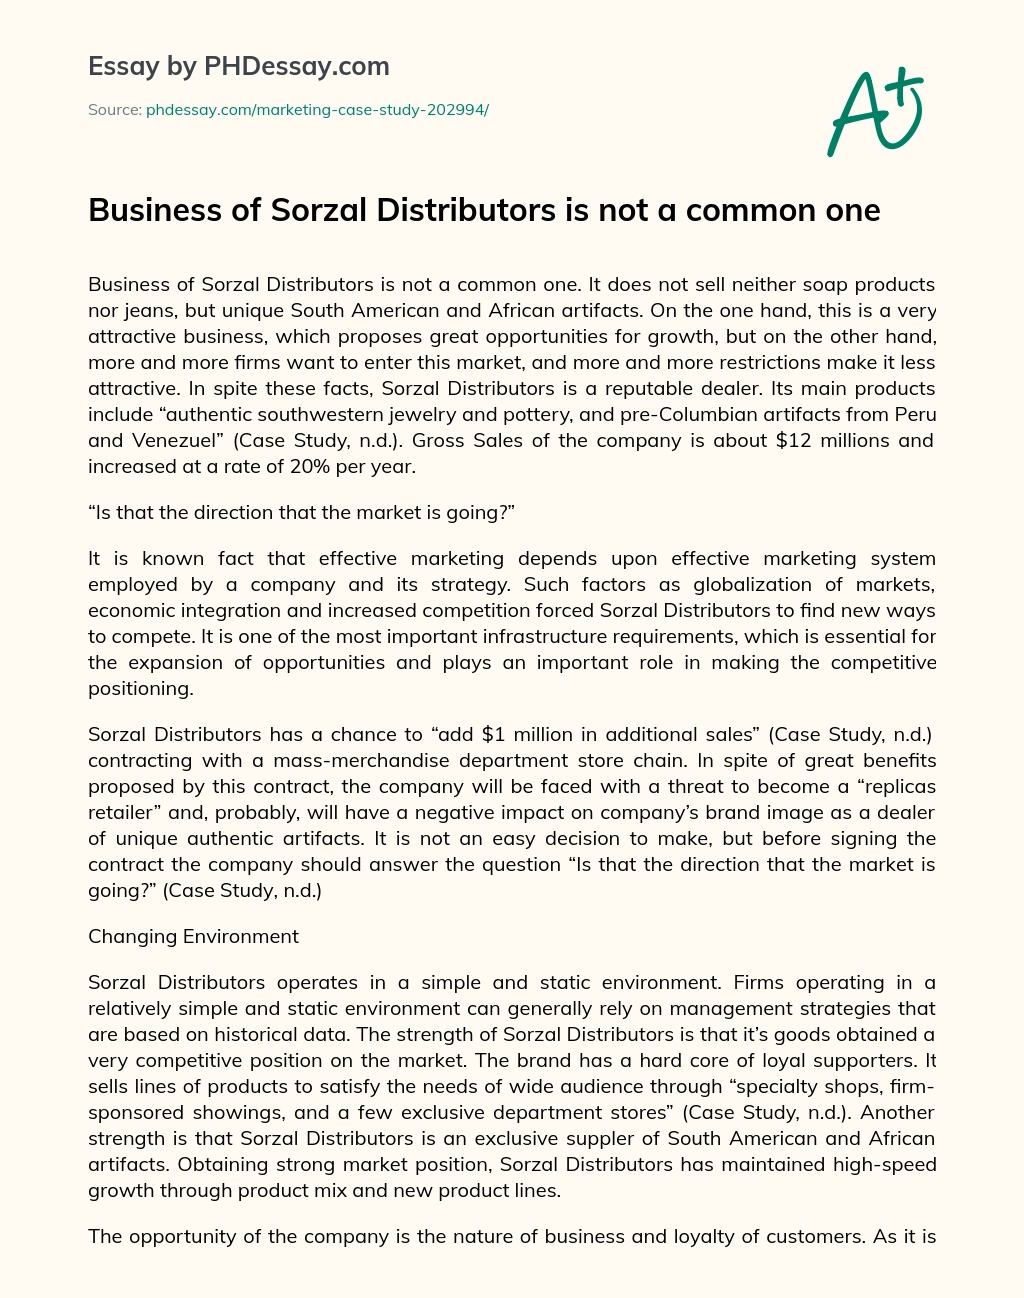 Business of Sorzal Distributors is not a common one essay